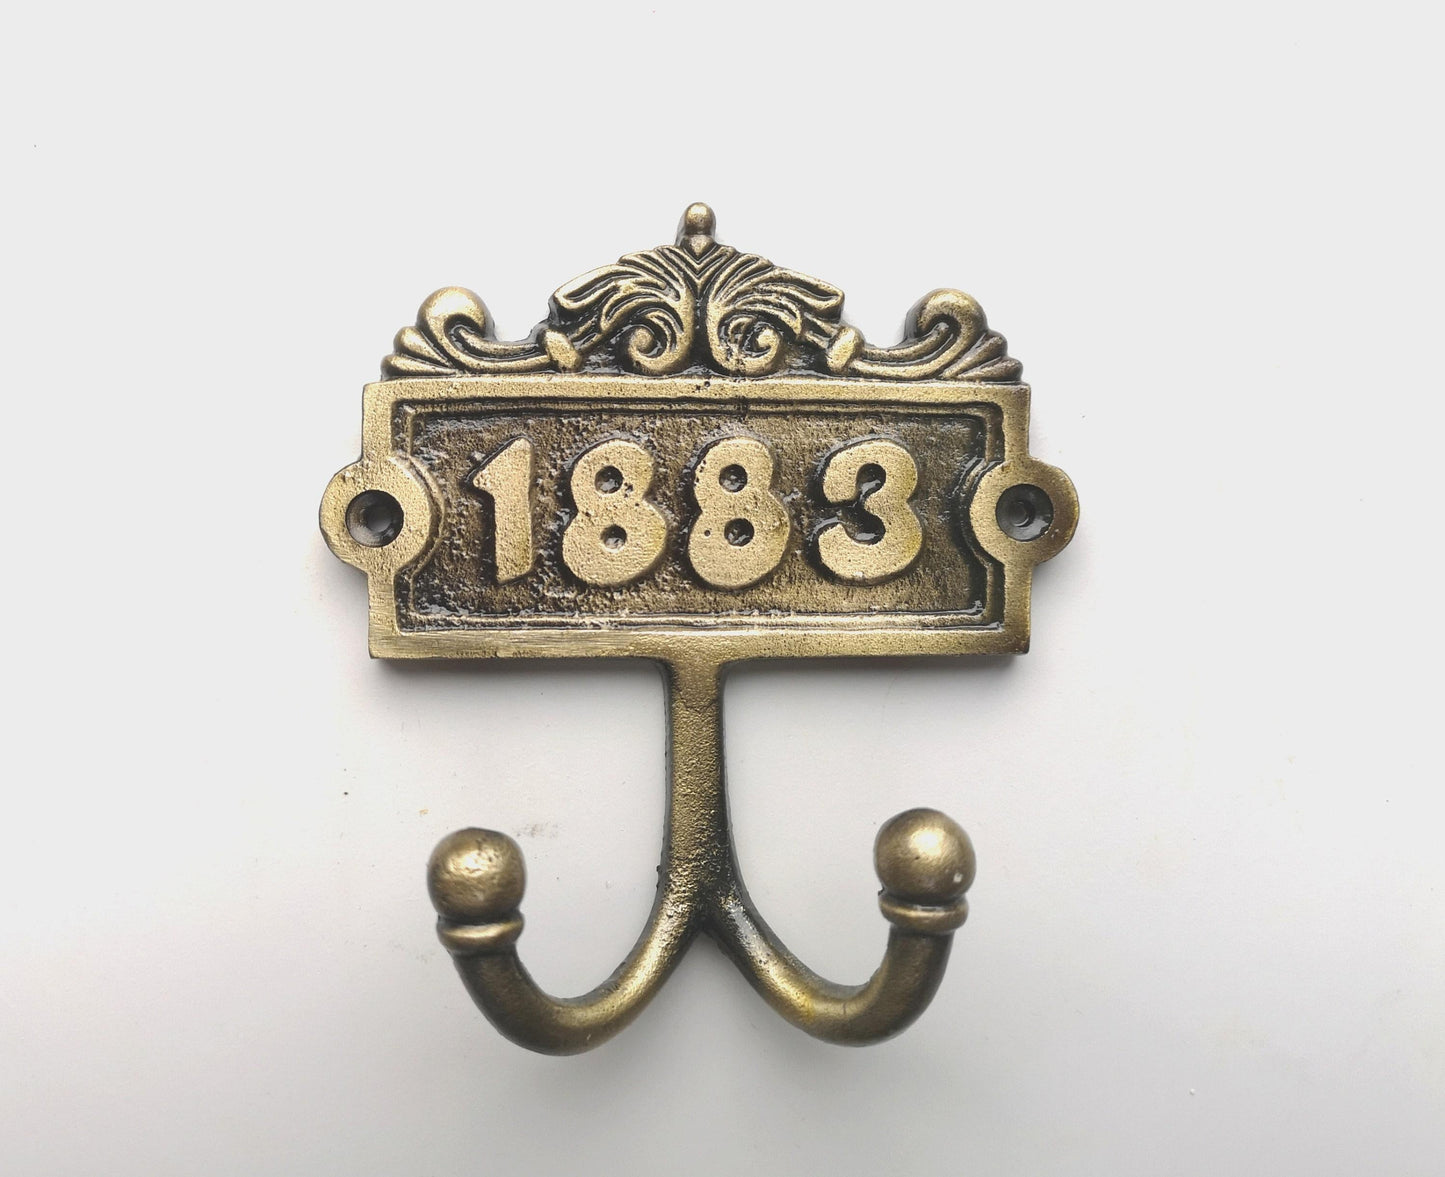 1883 Antique Double coat hook with a pair of matching screws - Cast Iron